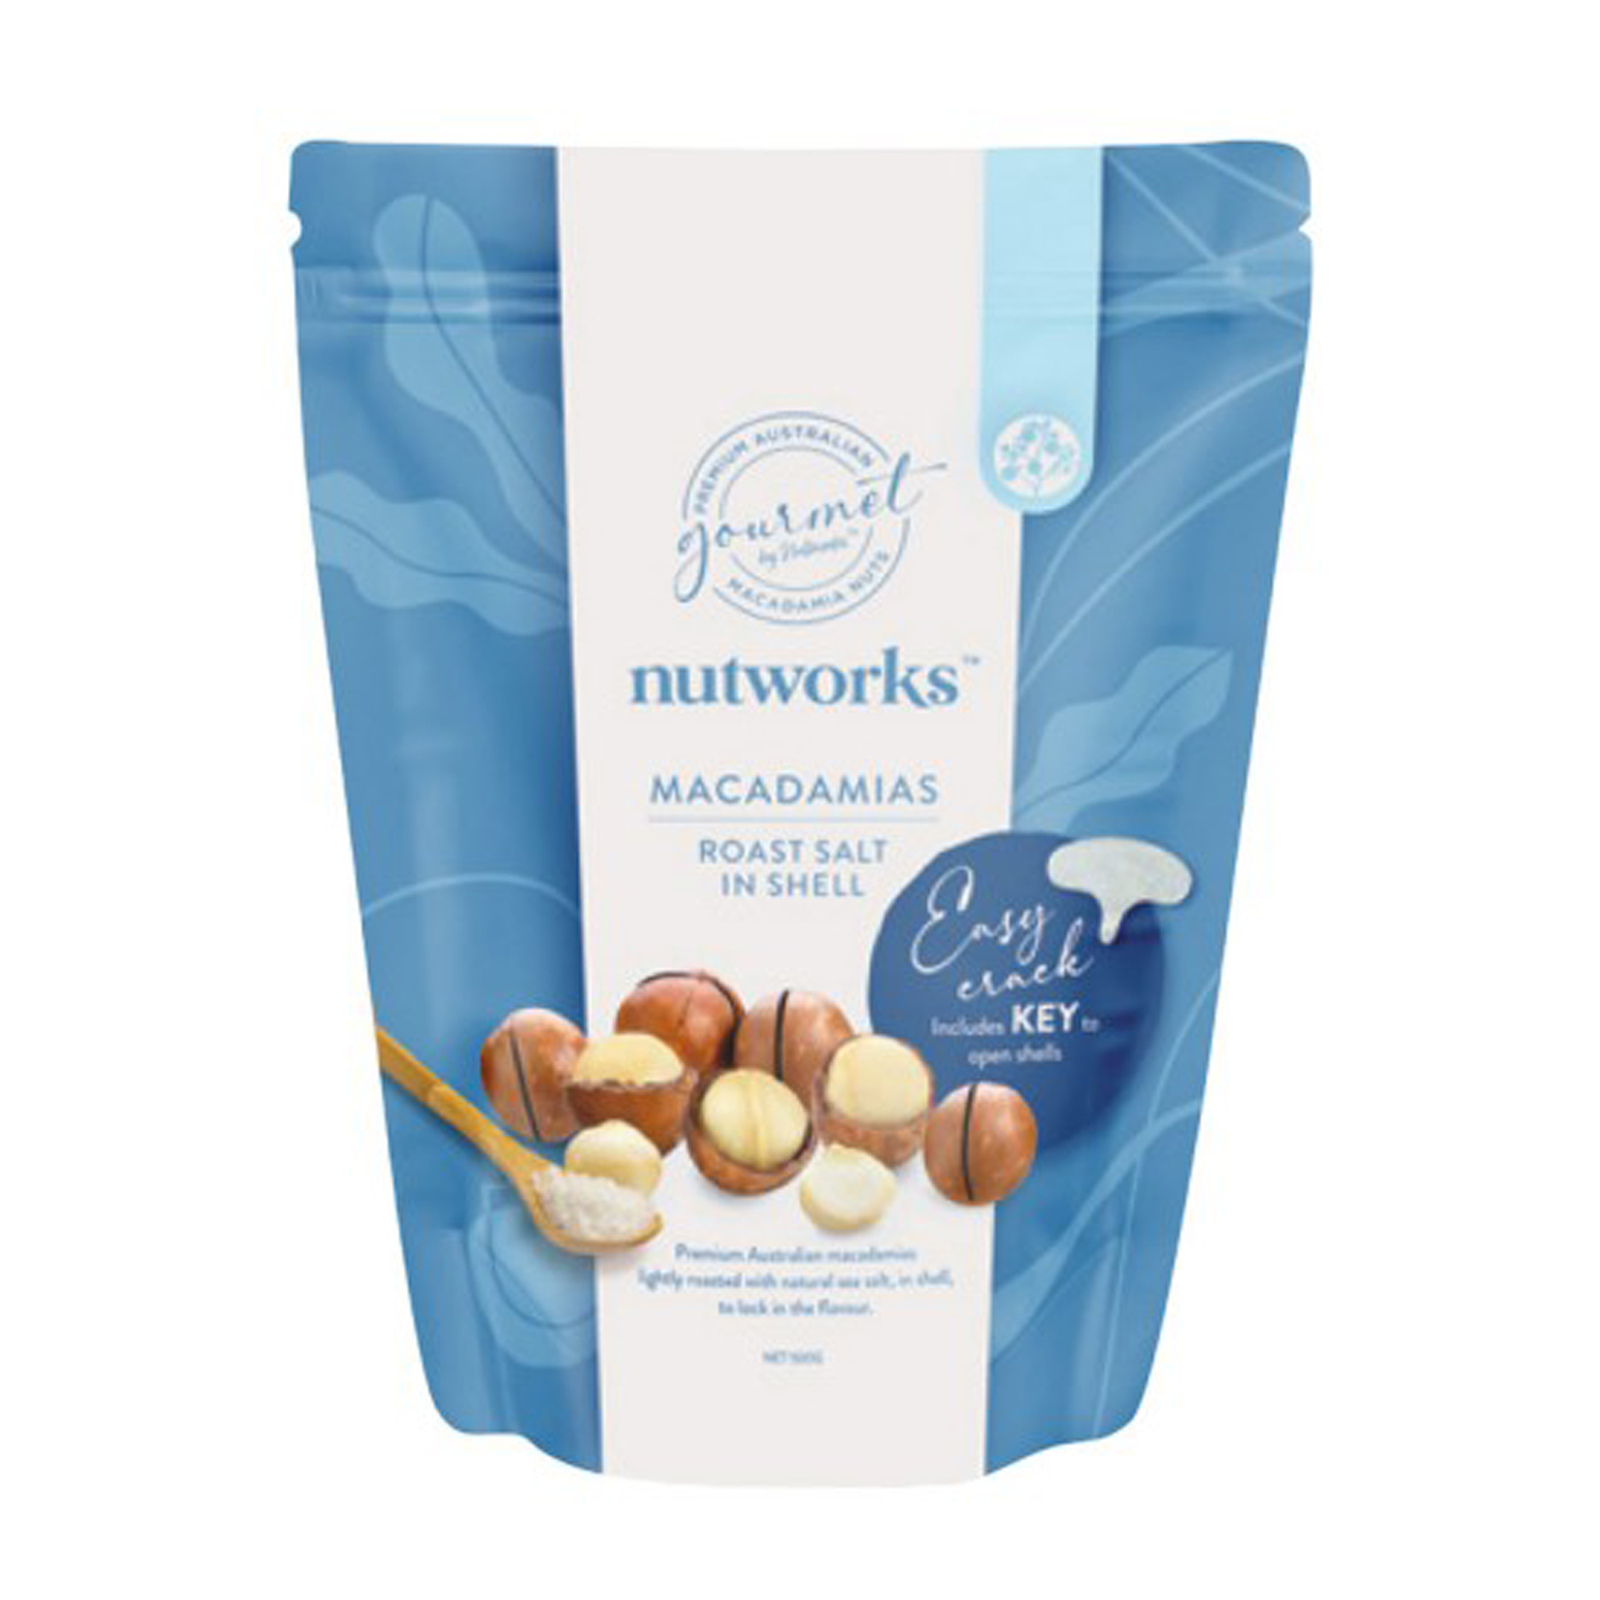 Murray's Roasted and Salted Pistachios - a package of salty, in-shell  pistachios